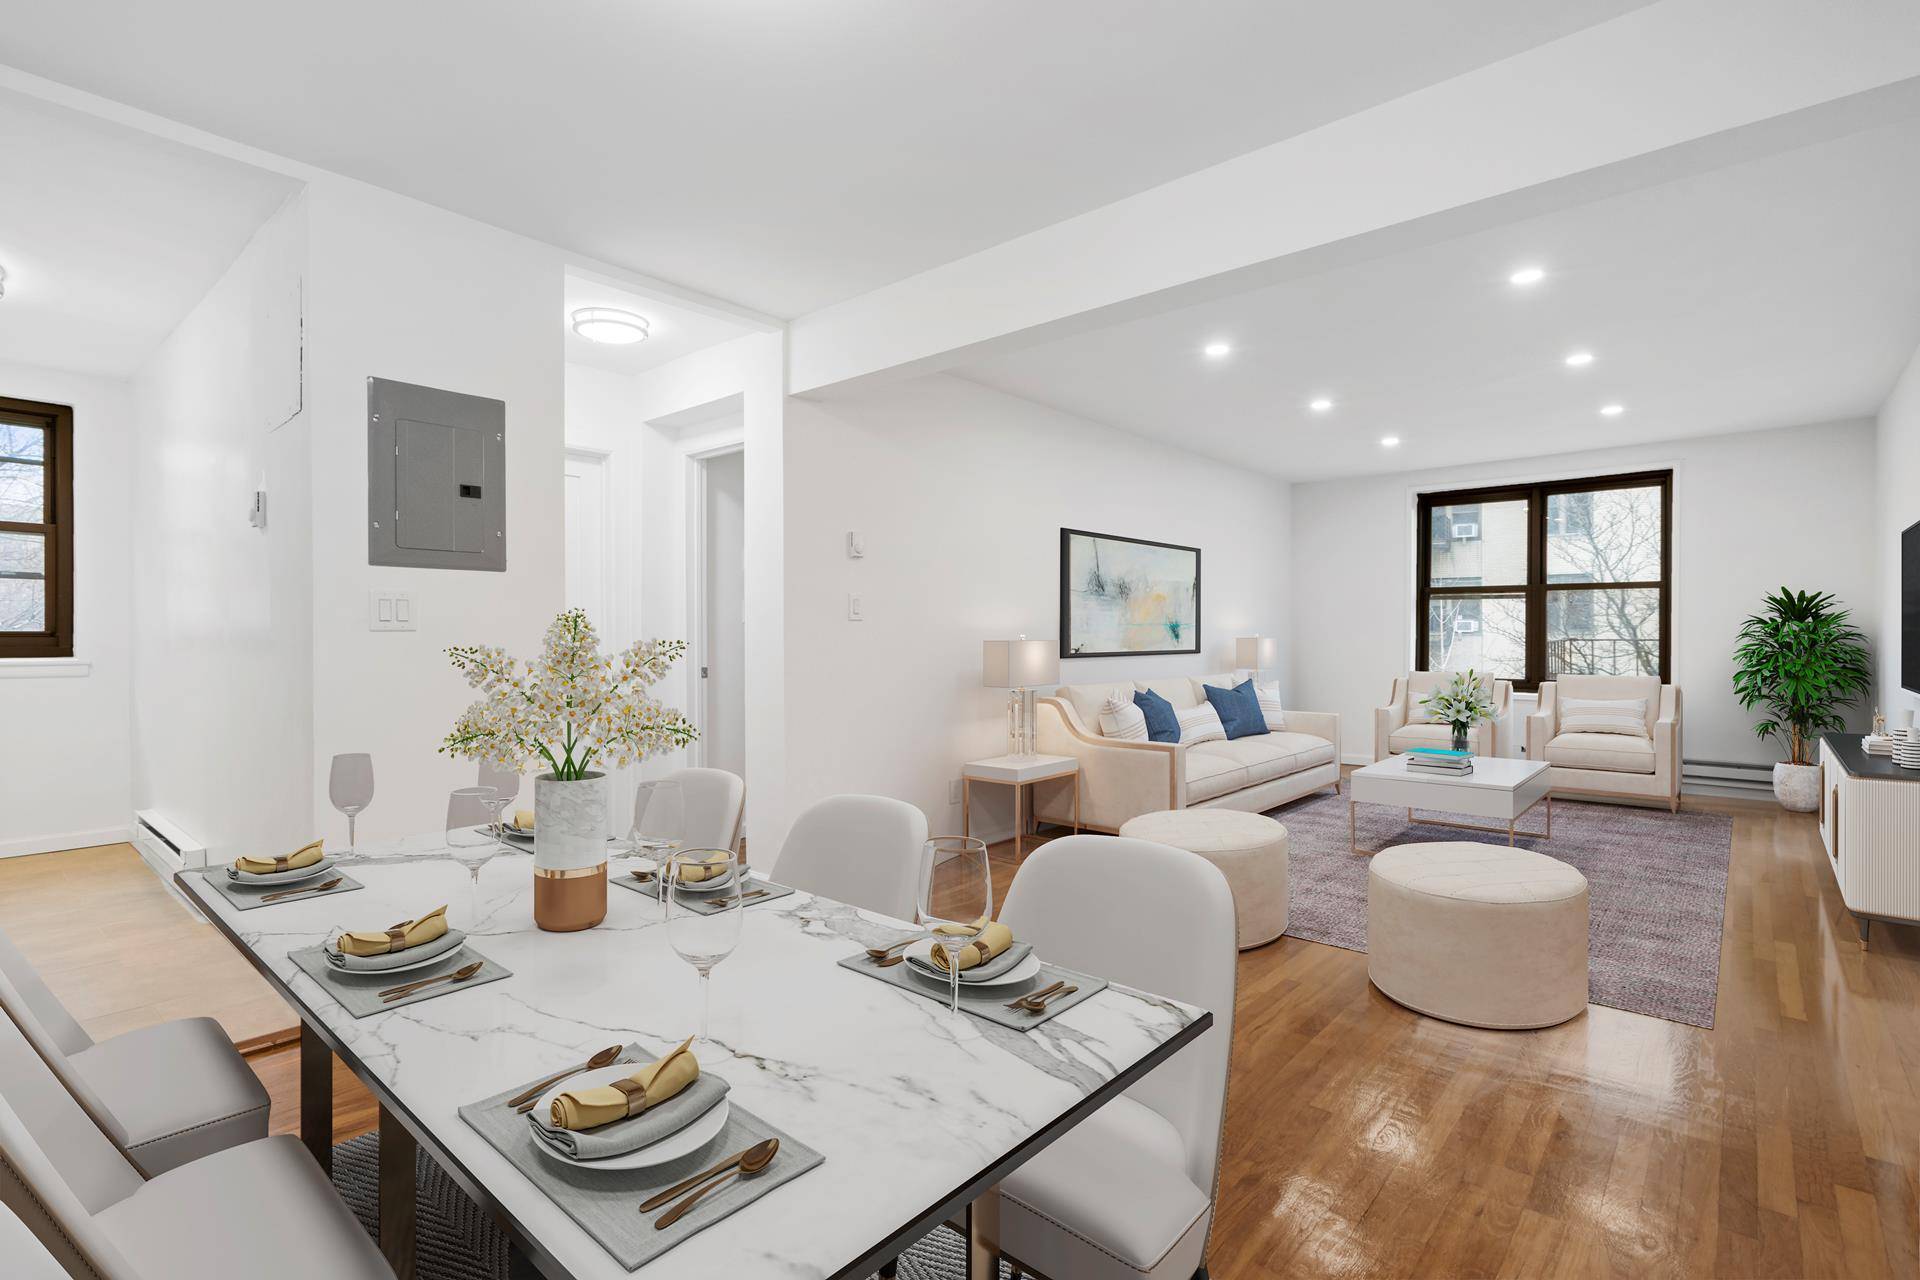 Welcome to this spacious, gut renovated one bedroom, one bath apartment with sunny East and North views, a block from the A train at 181st Street in Inwood Washington Heights.